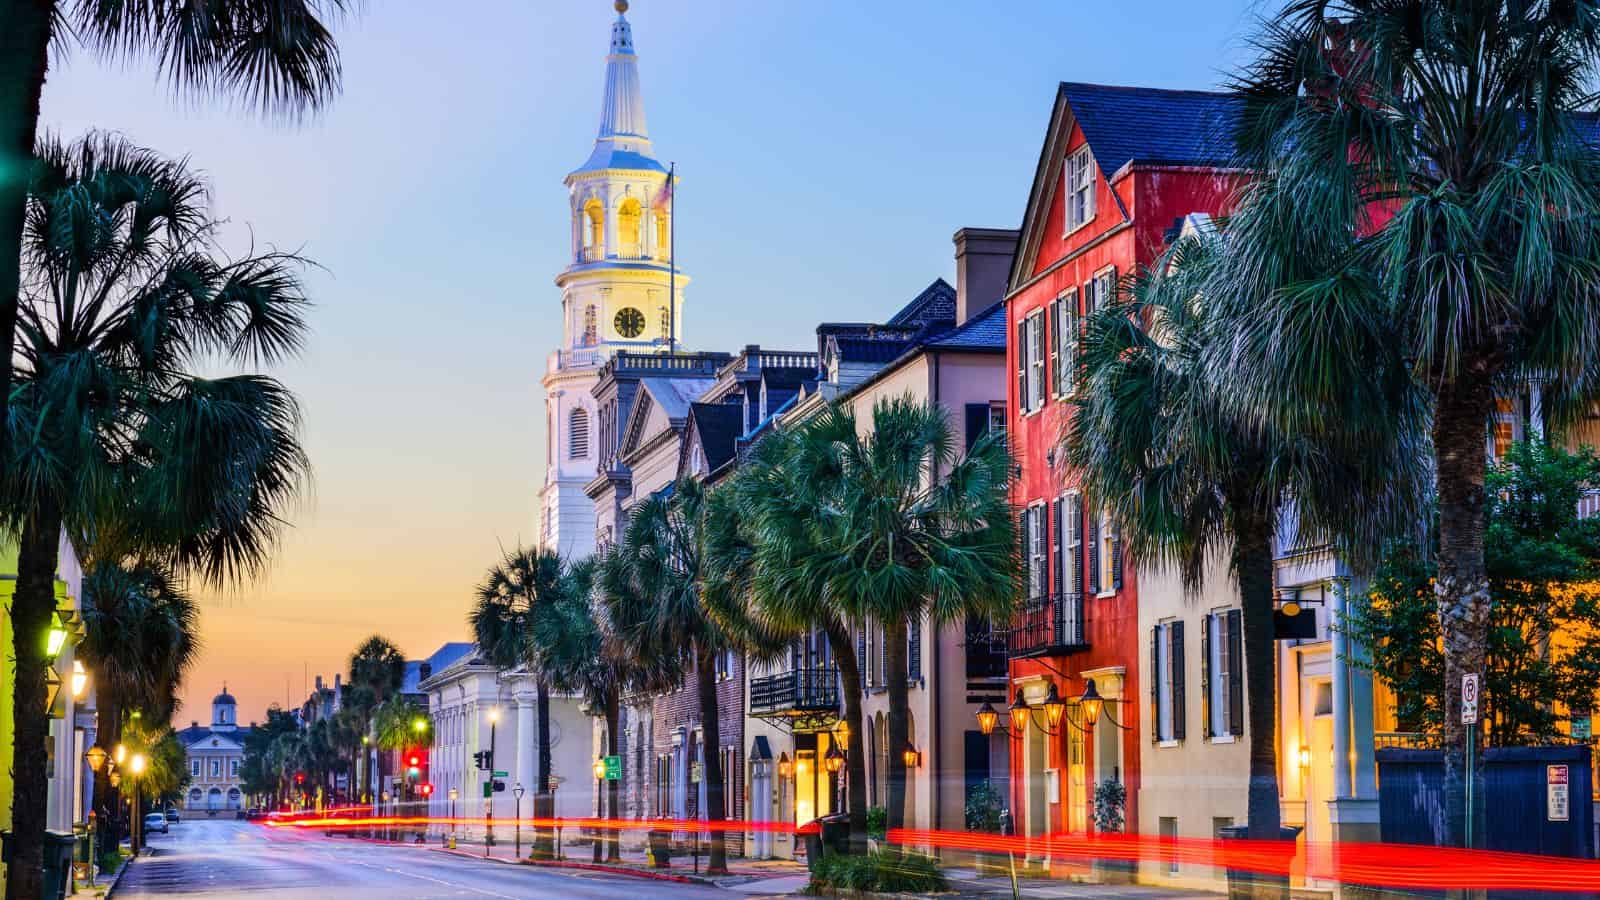 <p>Charleston has many historic streets to wander through, where you can admire its architecture and beautiful gardens. The landmarks to head to include the Fort Sumter National Monument and the Charleston Museum. Make sure to also enjoy the southern hospitality of Charleston with its seafood and Lowcountry dishes.</p>